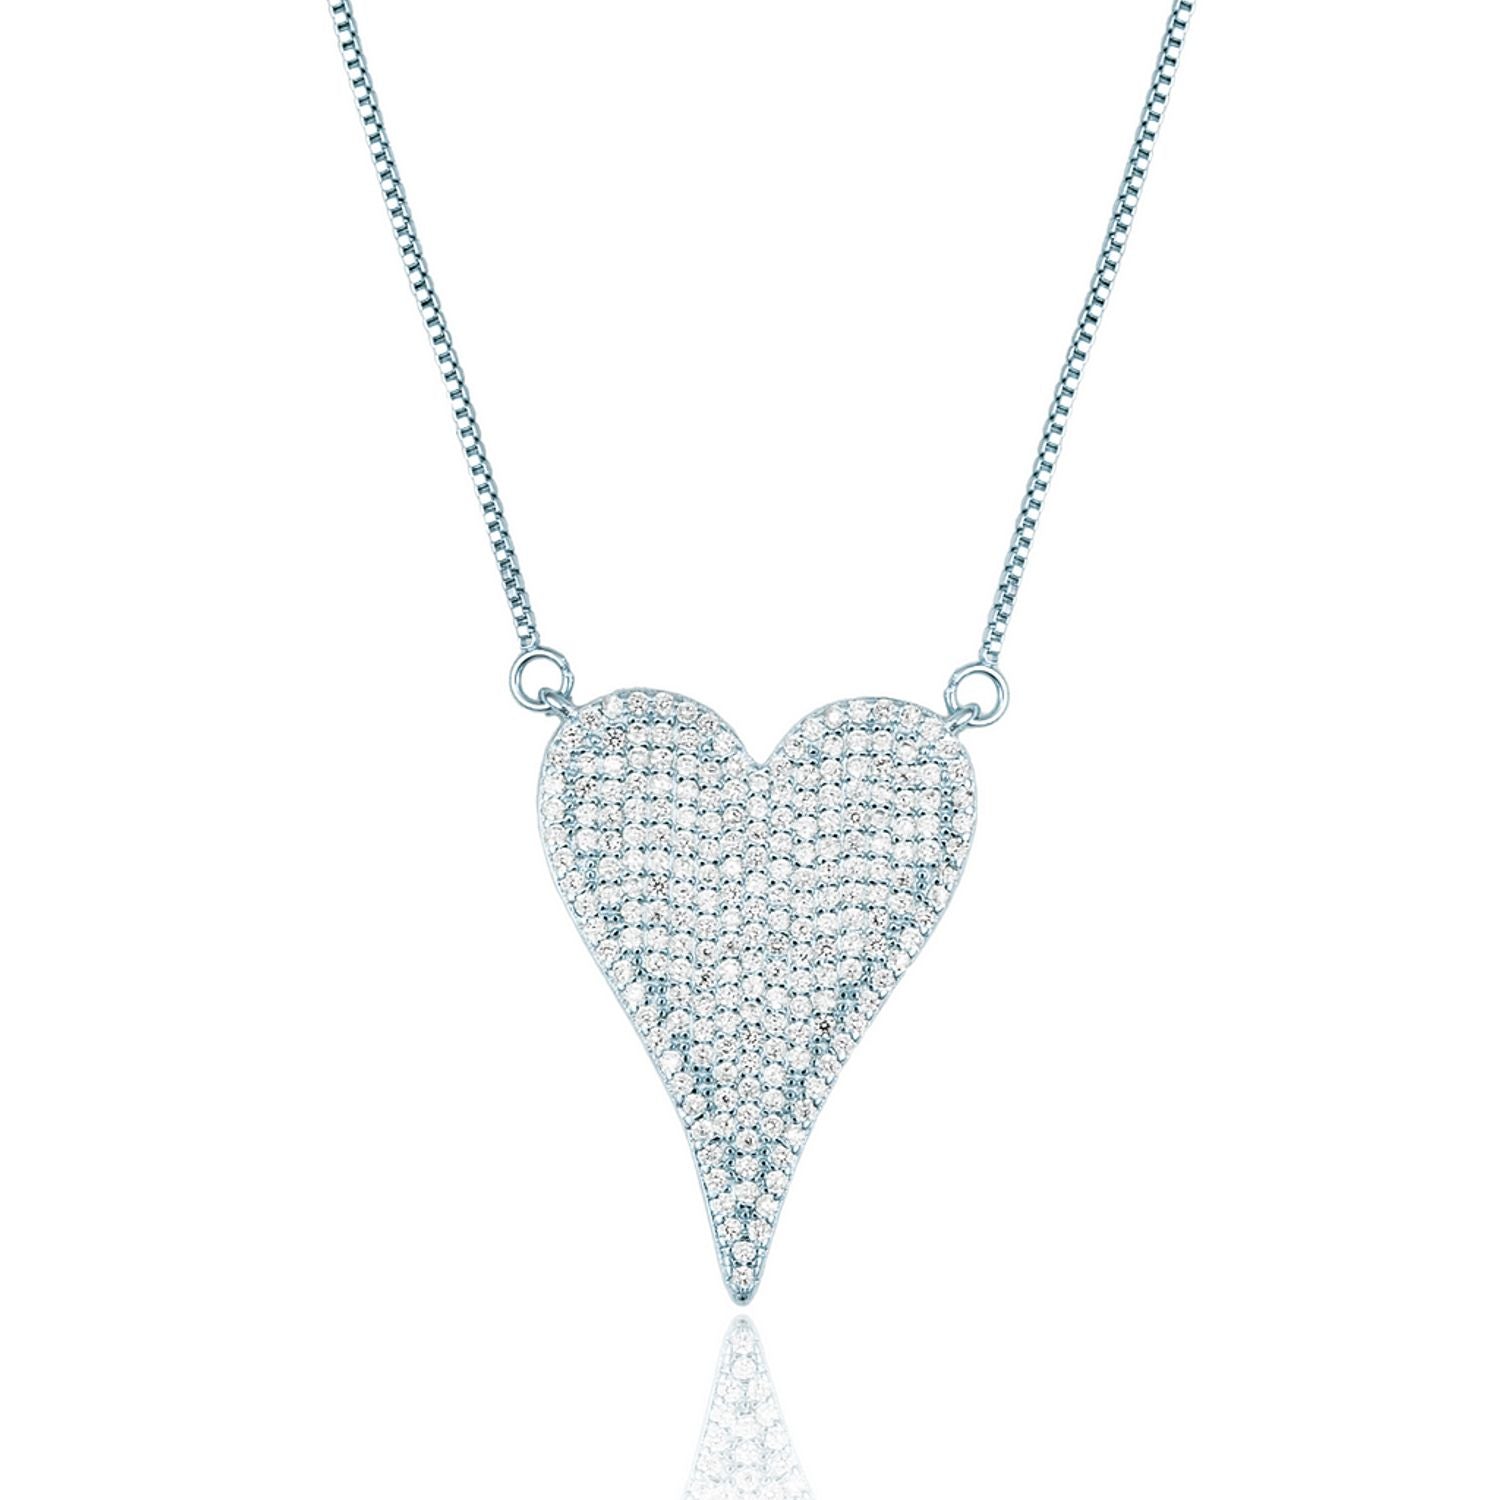 Heart Pendant Box Chain Necklace With Clear Micro CZ Stones (G168)